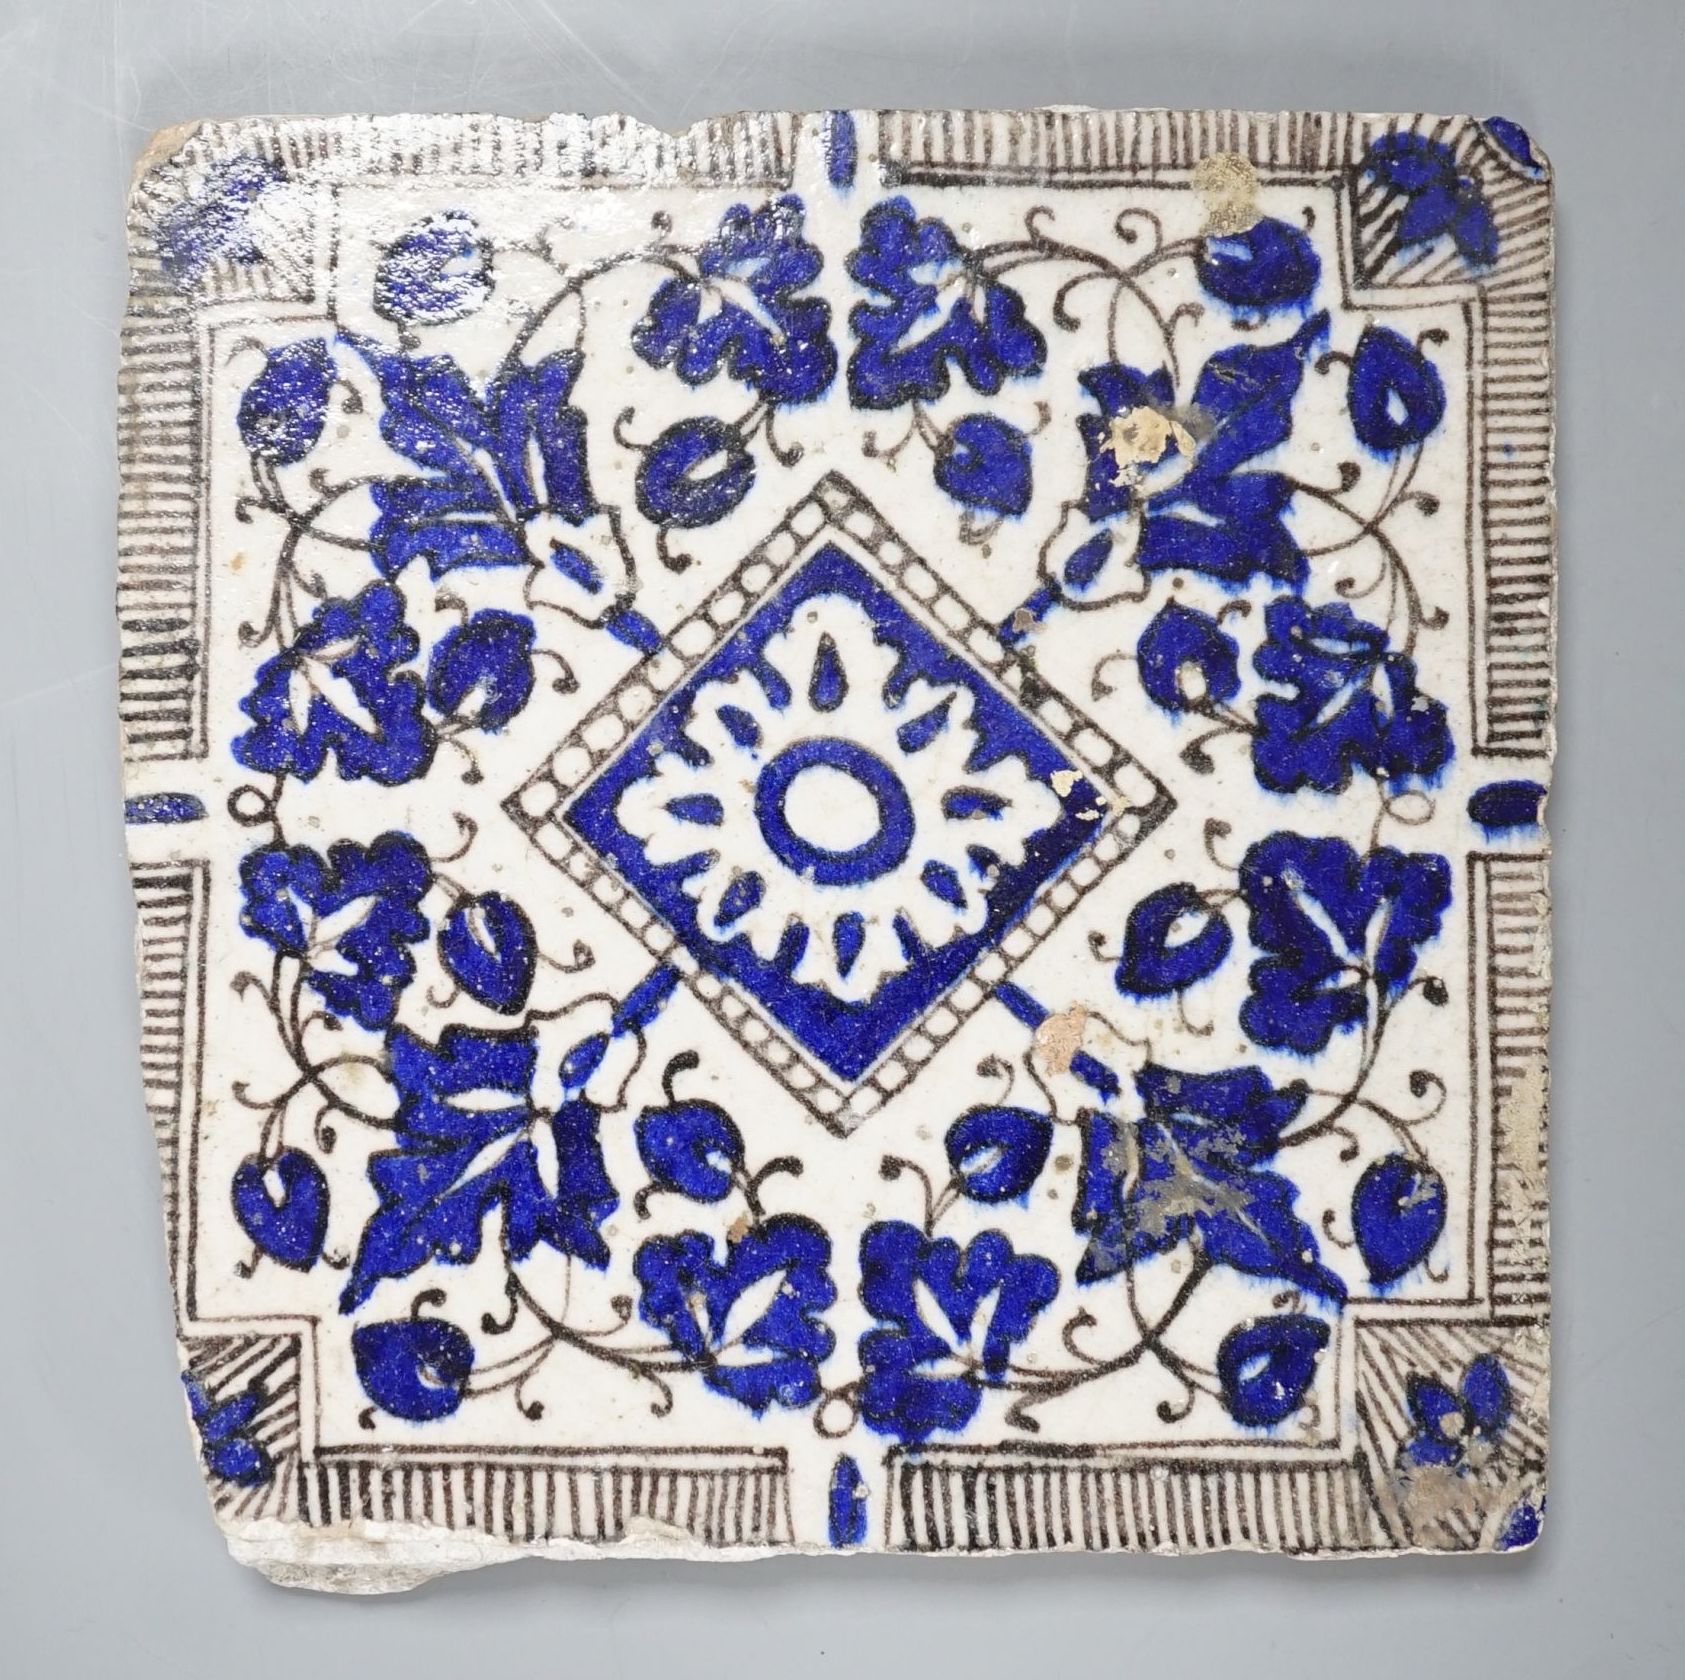 A Persian blue and white ceramic tile - 21 x 20cm